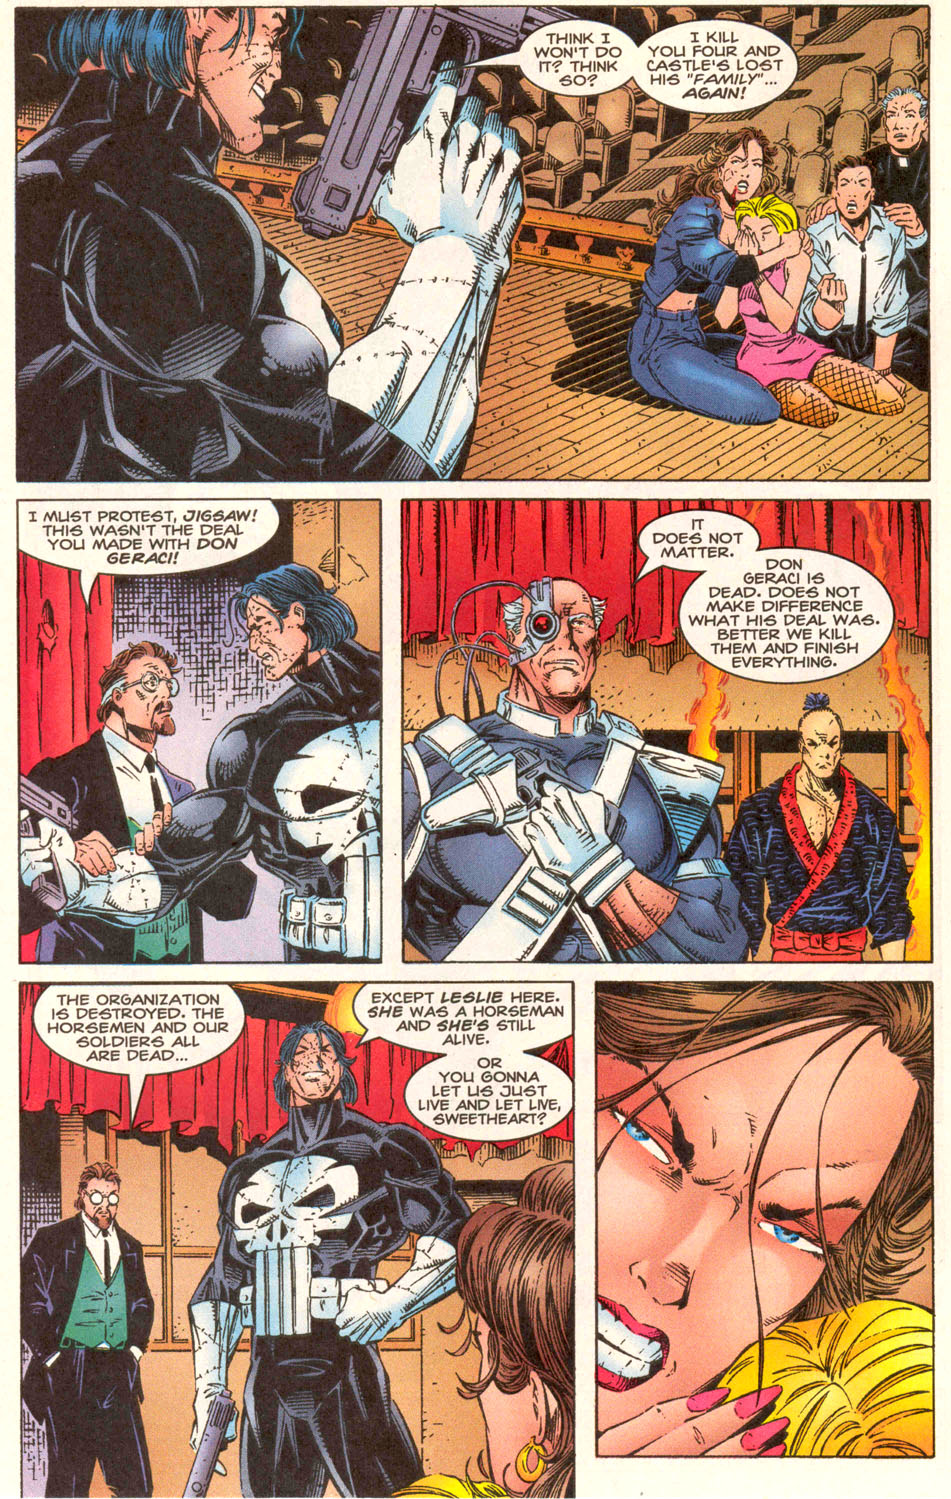 Punisher (1995) issue 10 - Last Shot Fired - Page 3